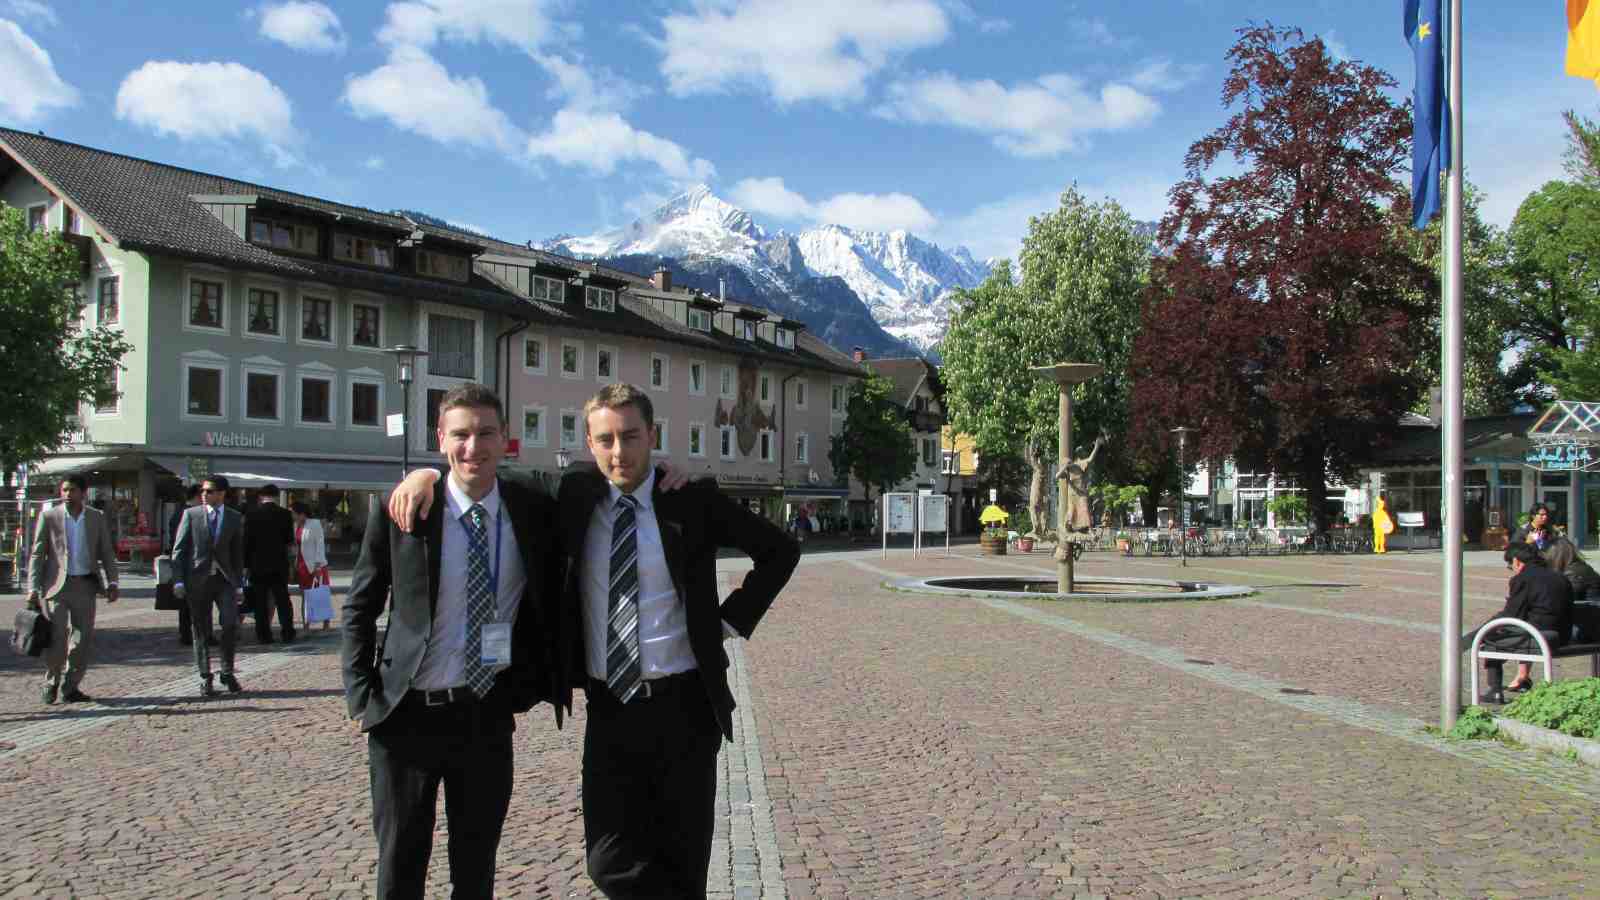 Dylan Chambers (left) and Matt Hayes outside the Congress Centre in Garmisch-Partenkirchen, where they attended the G20 Youth Forum.